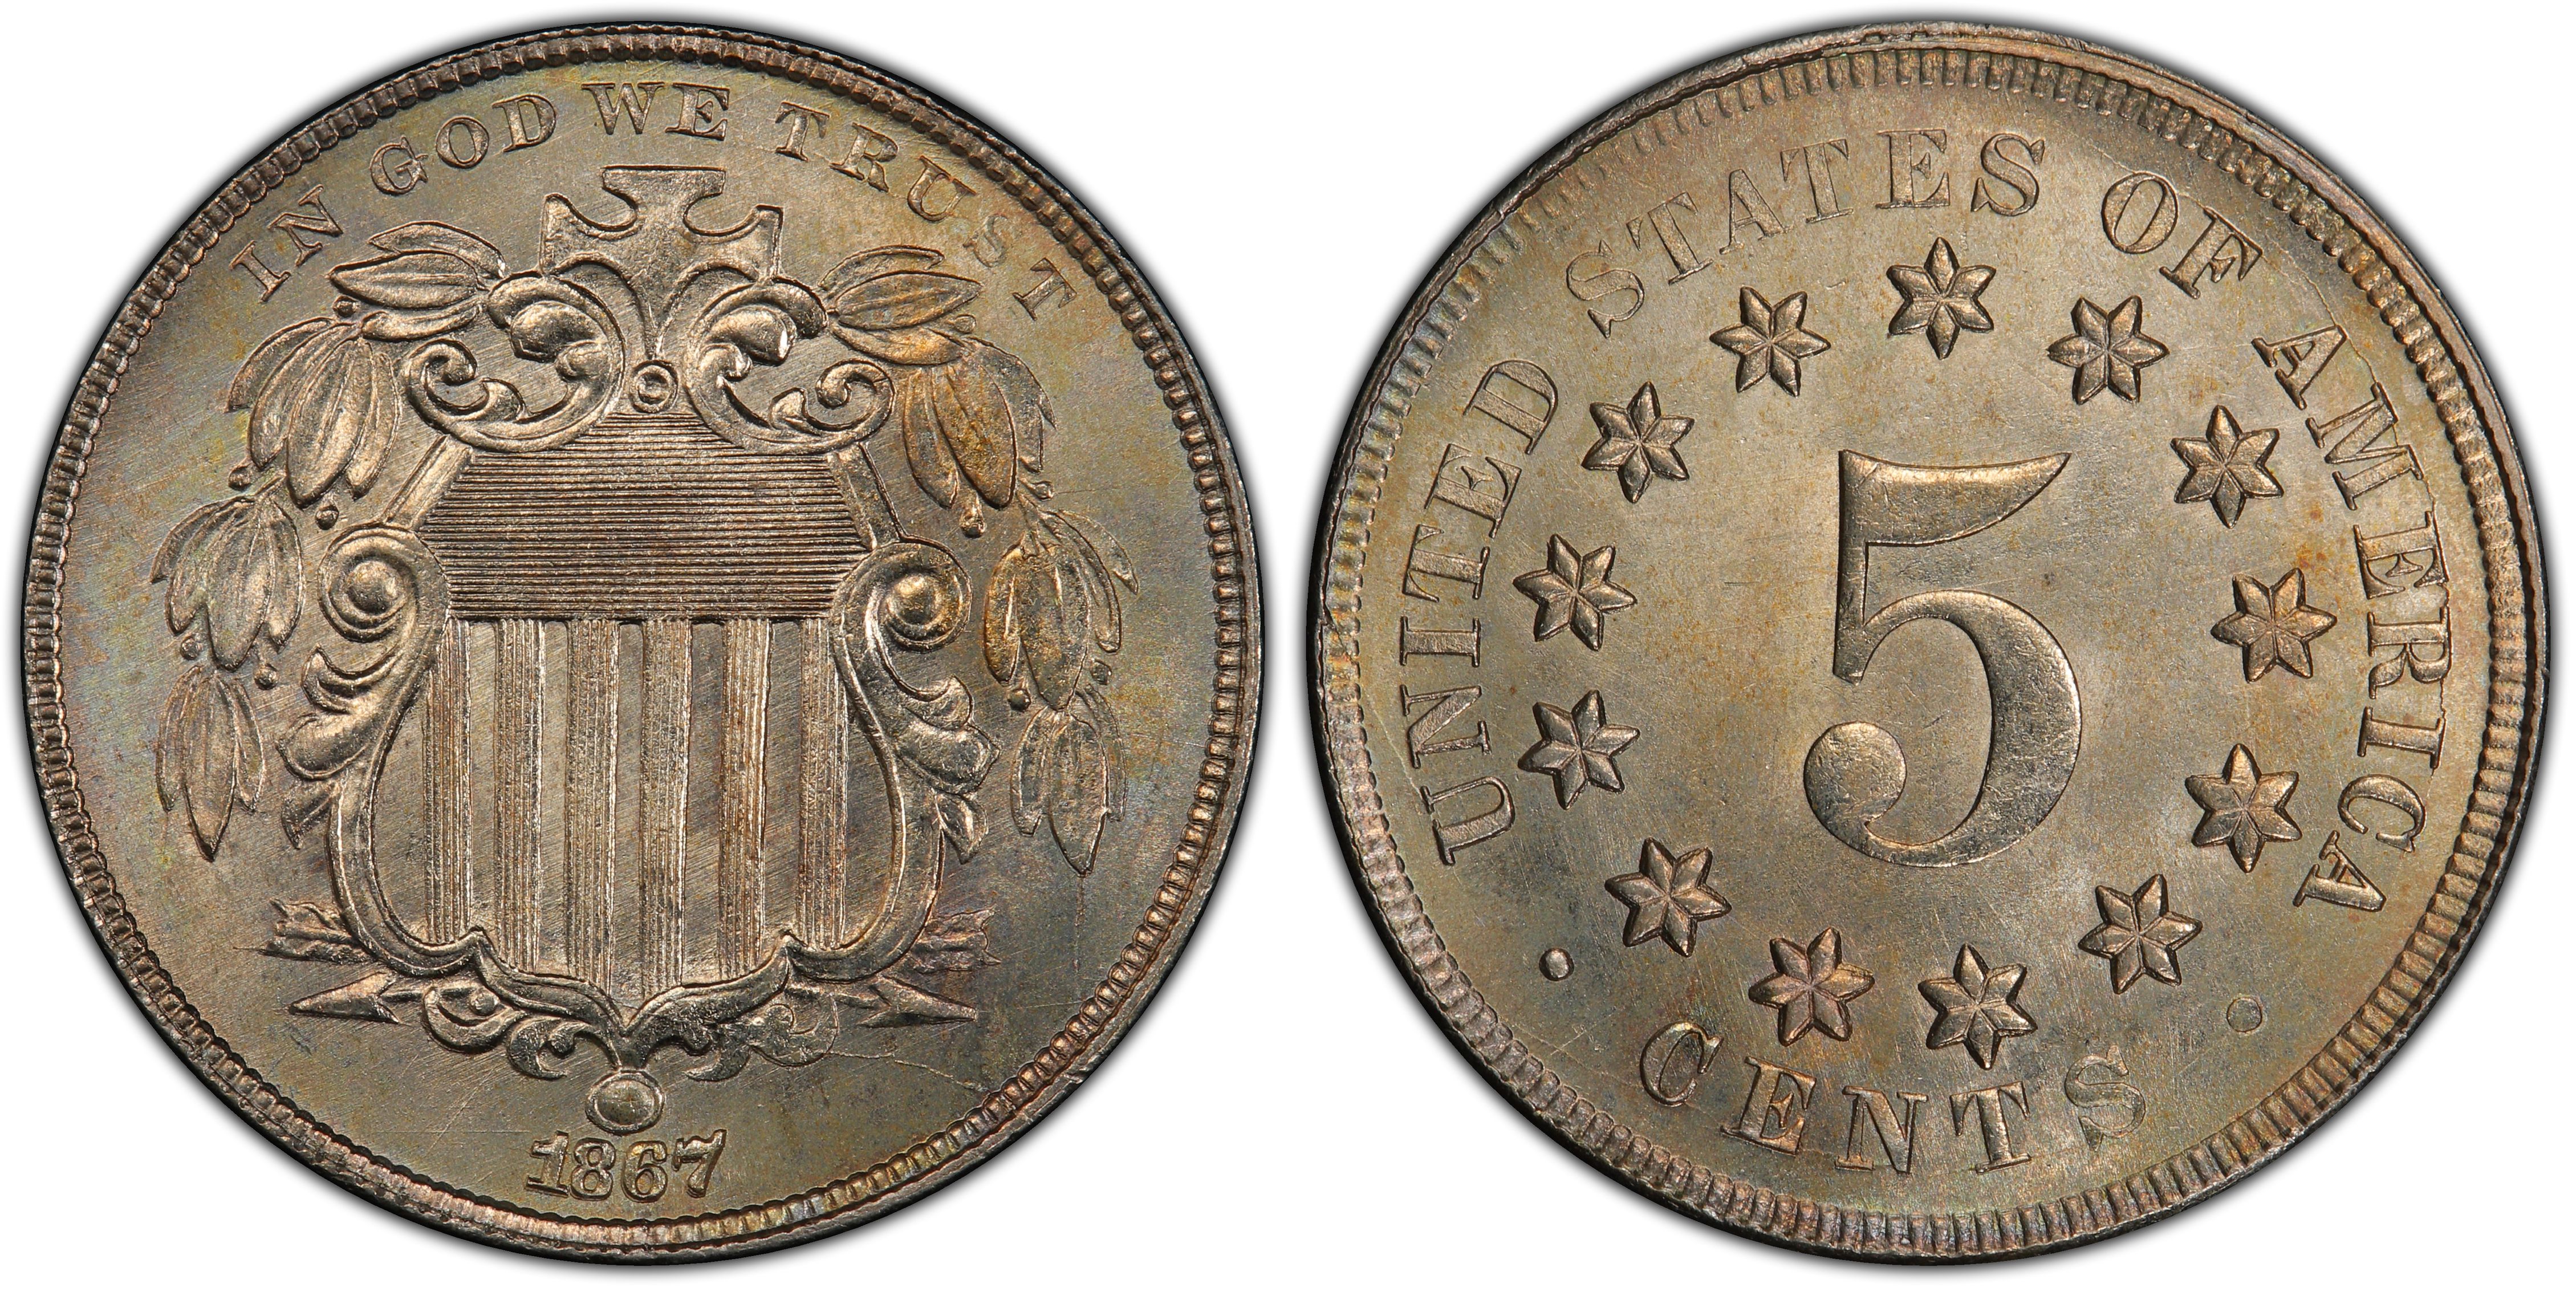 1867 5C No Rays (Regular Strike) - PCGS CoinFacts